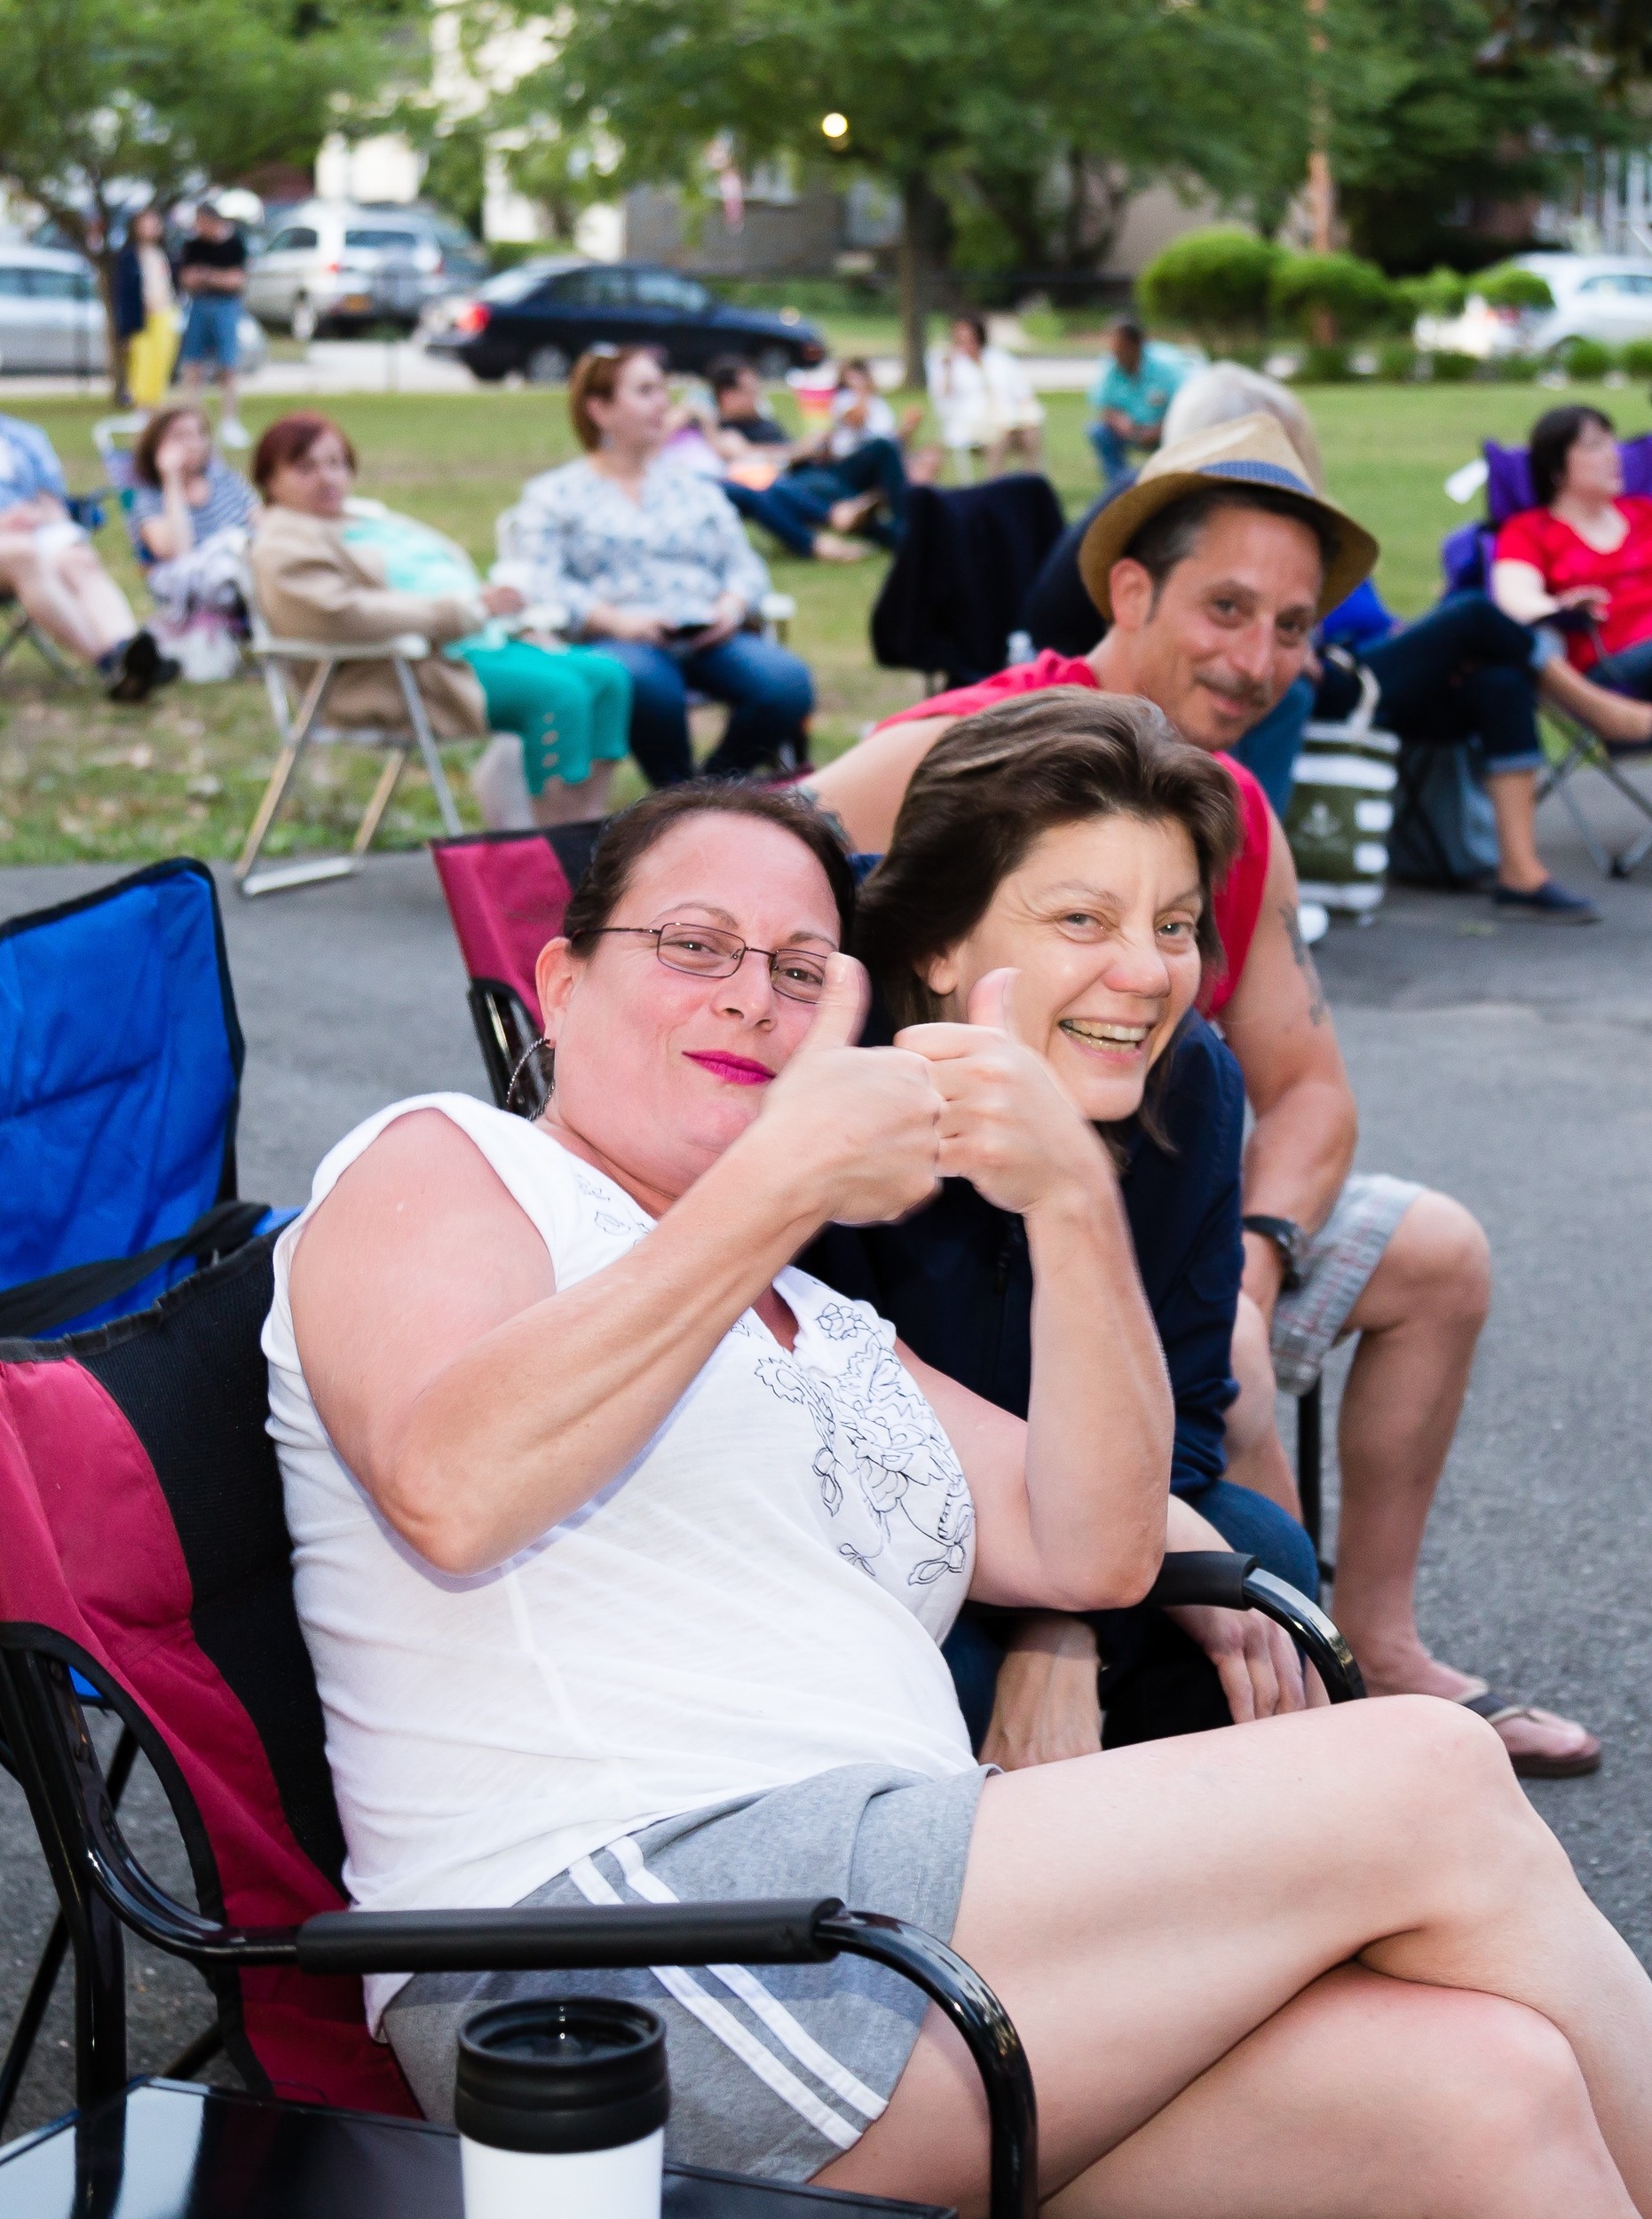 Concert goers at The Steel Silk Band performance at East Rockaway Summer Concert Series at Memorial Park in East Rockaway, New York on Saturday July 2nd 2016.